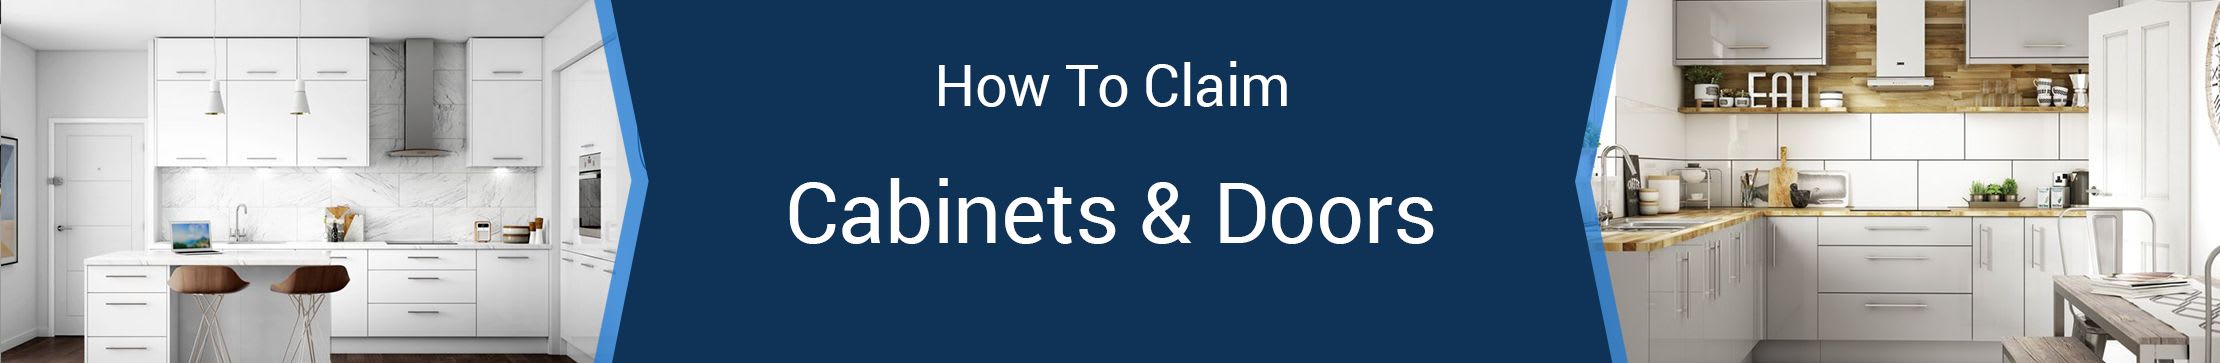 how to claim cabinet and doors